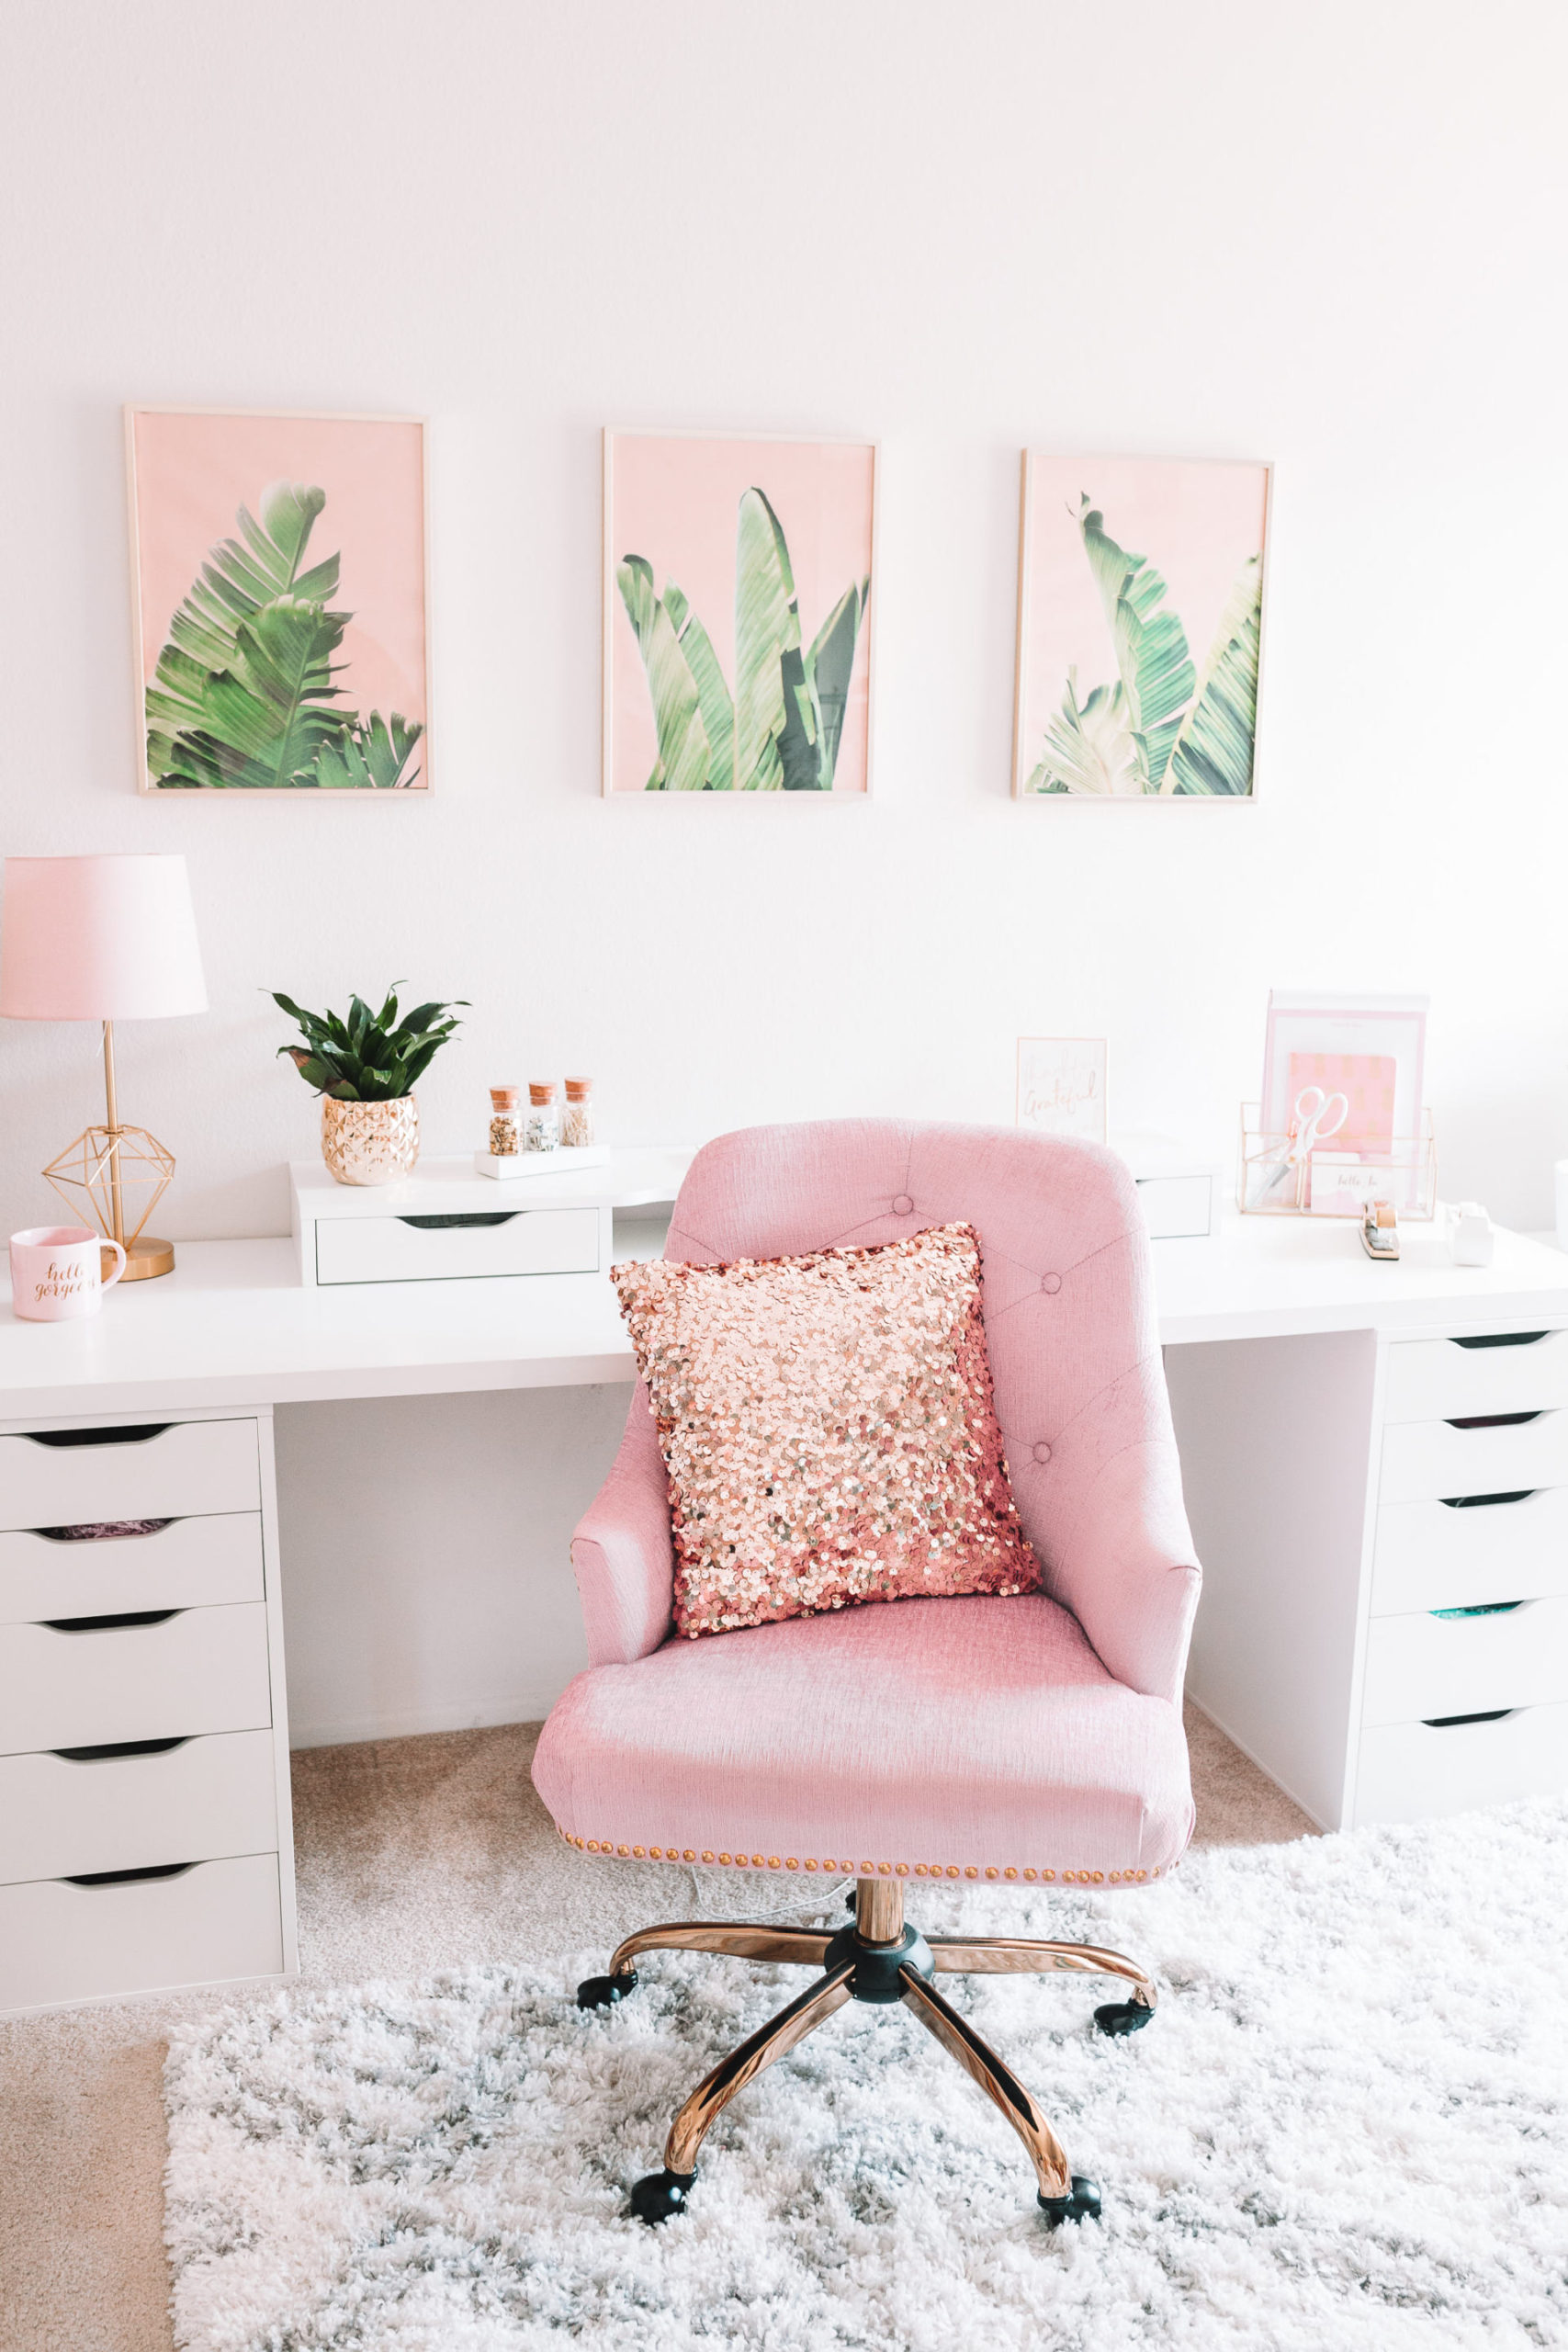 Home Office Accessories - Make Your Workspace FUN! - That's Just Jeni